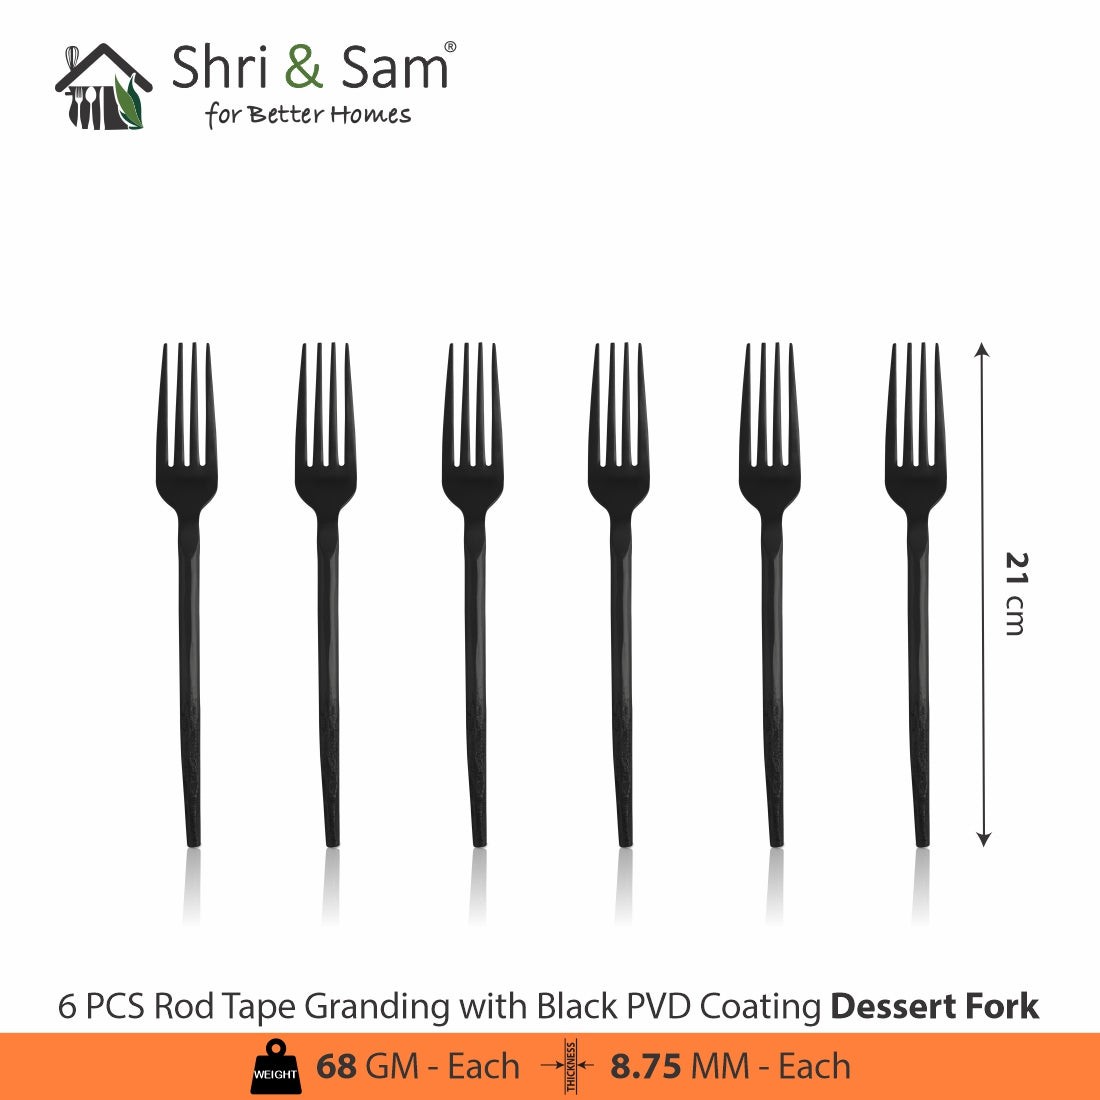 Stainless Steel 24 PCS Cutlery Set with PVD Coating Rod Tape Granding